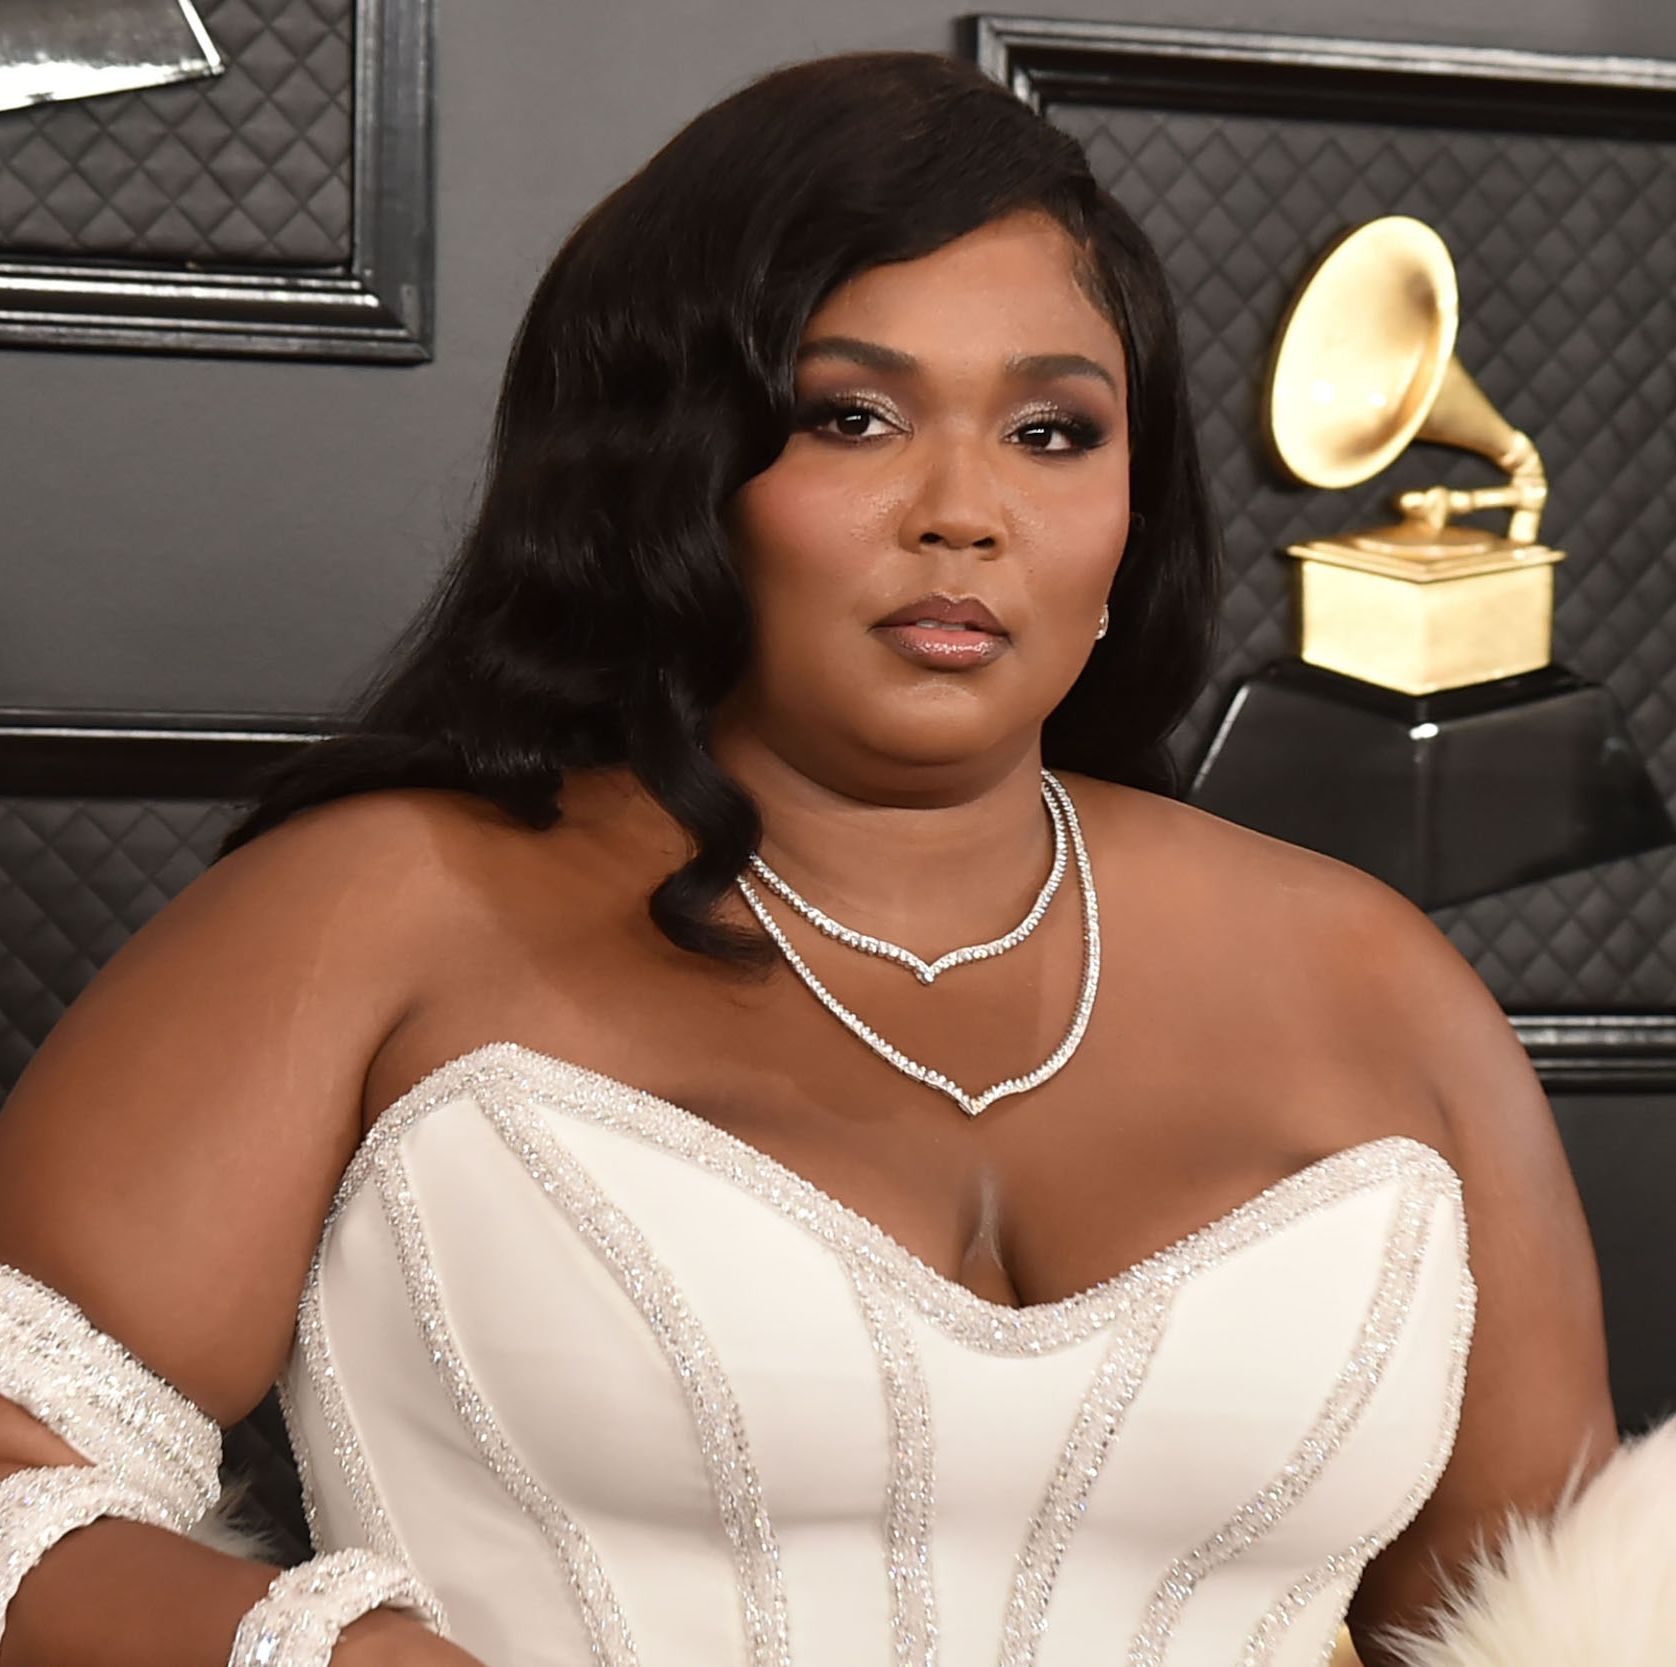 Body positivity: why Lizzo is moving away from the movement